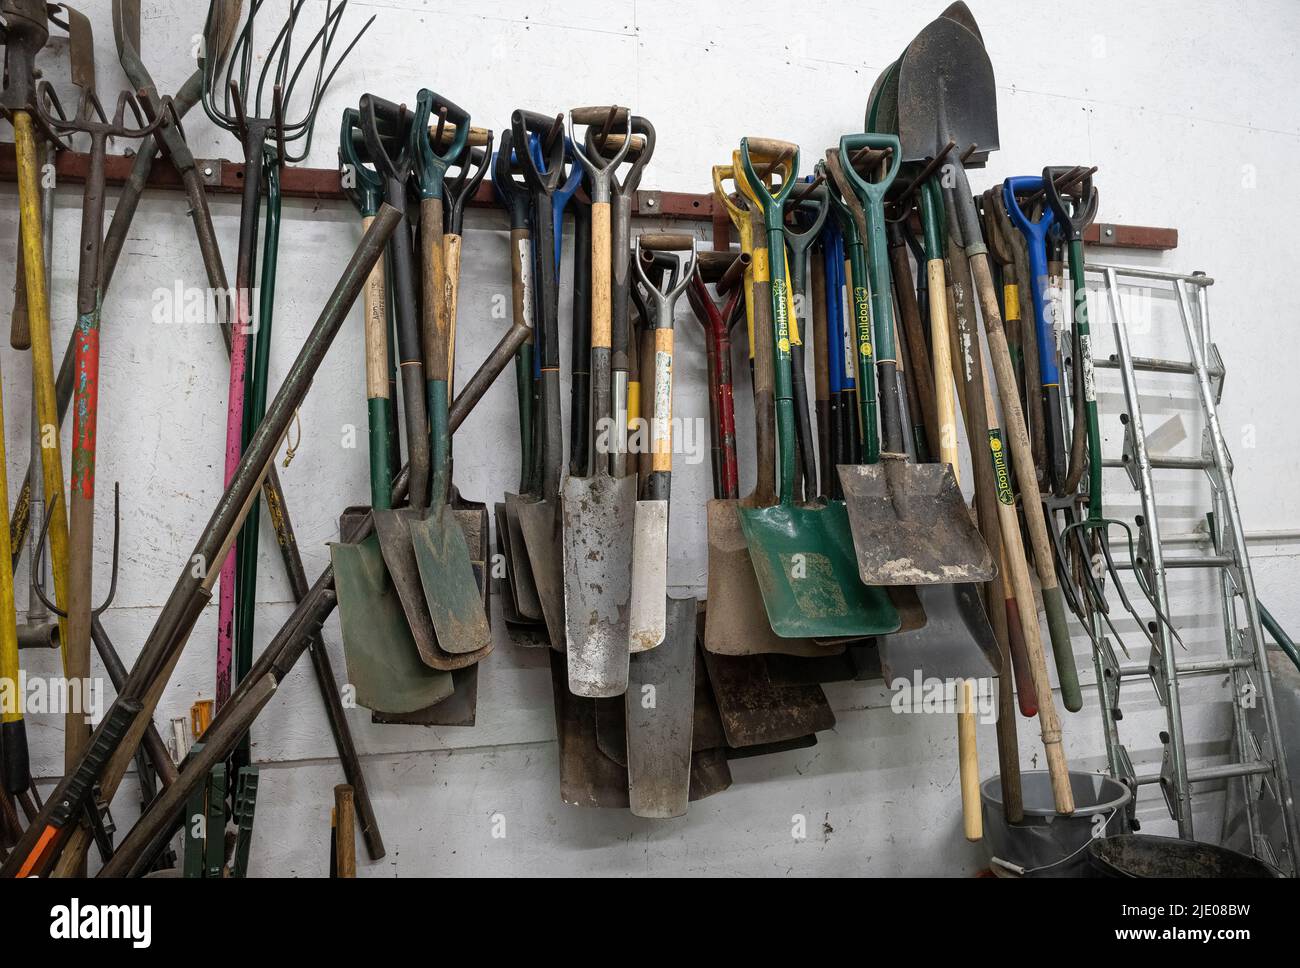 Collection of tools hanging up in a workshop, including spades, shovels, pitch forks and garden forks Stock Photo